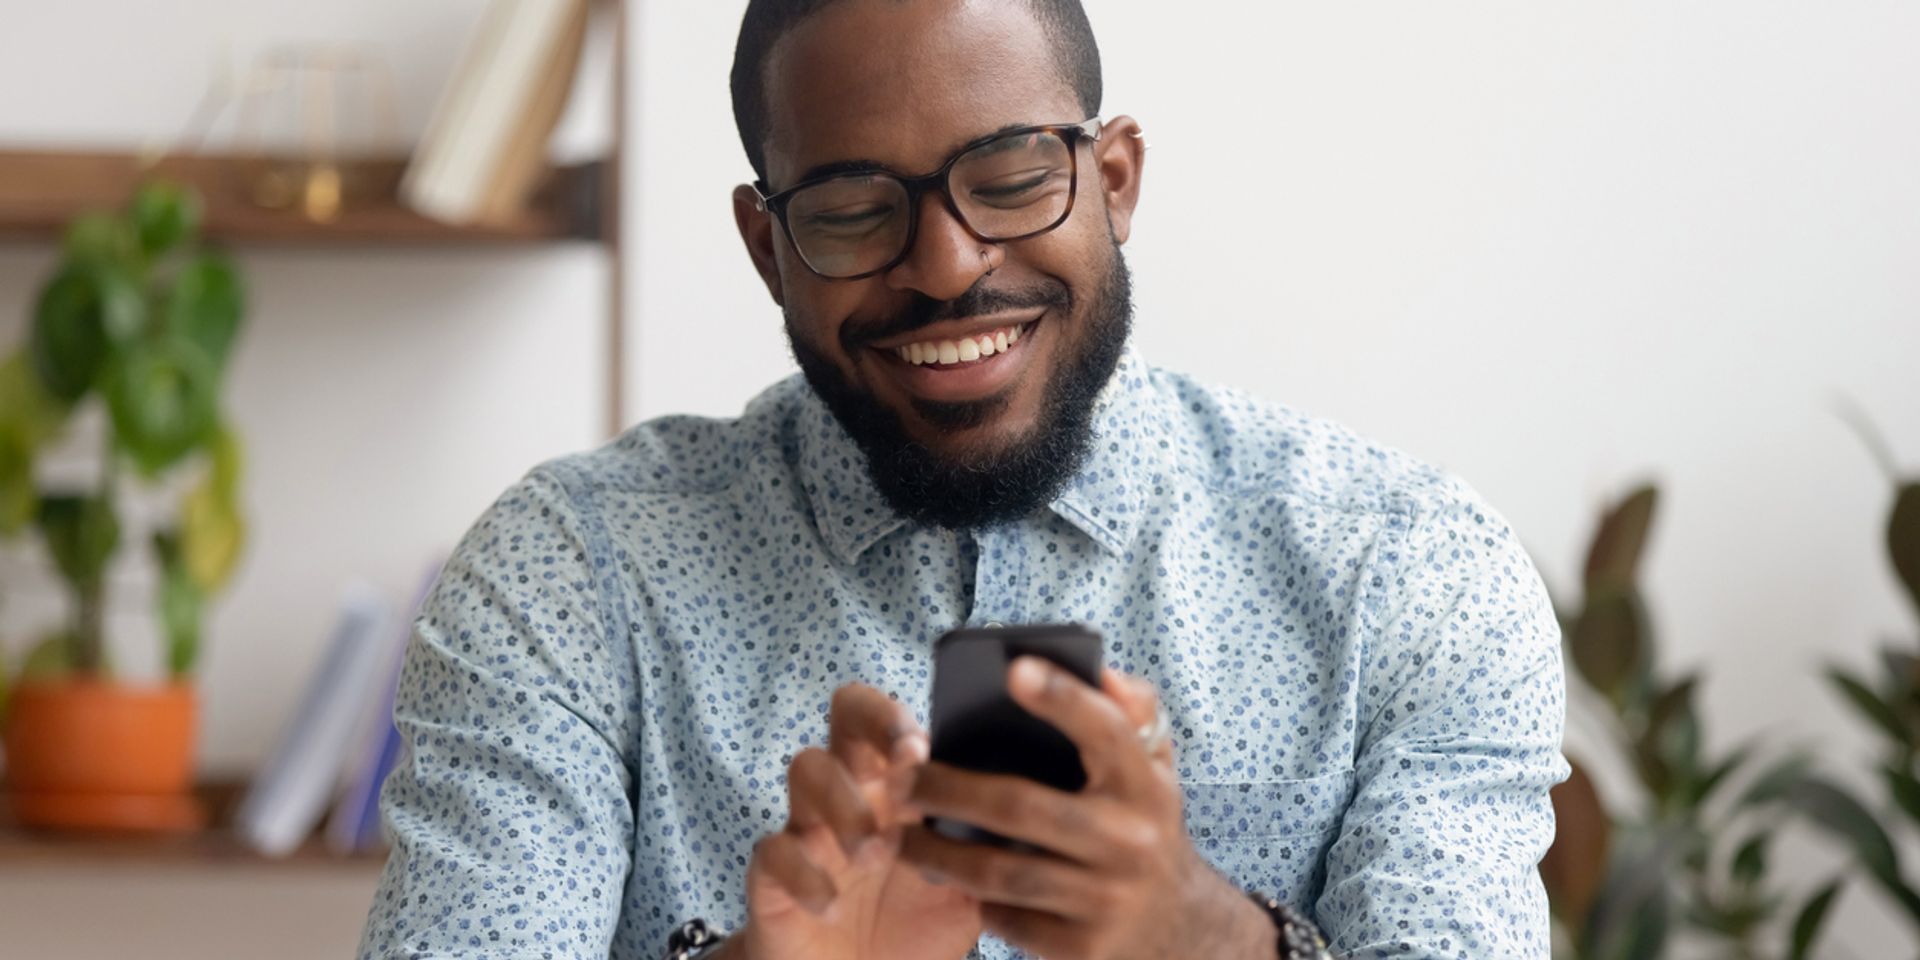 Black man typing on his phone and smiling